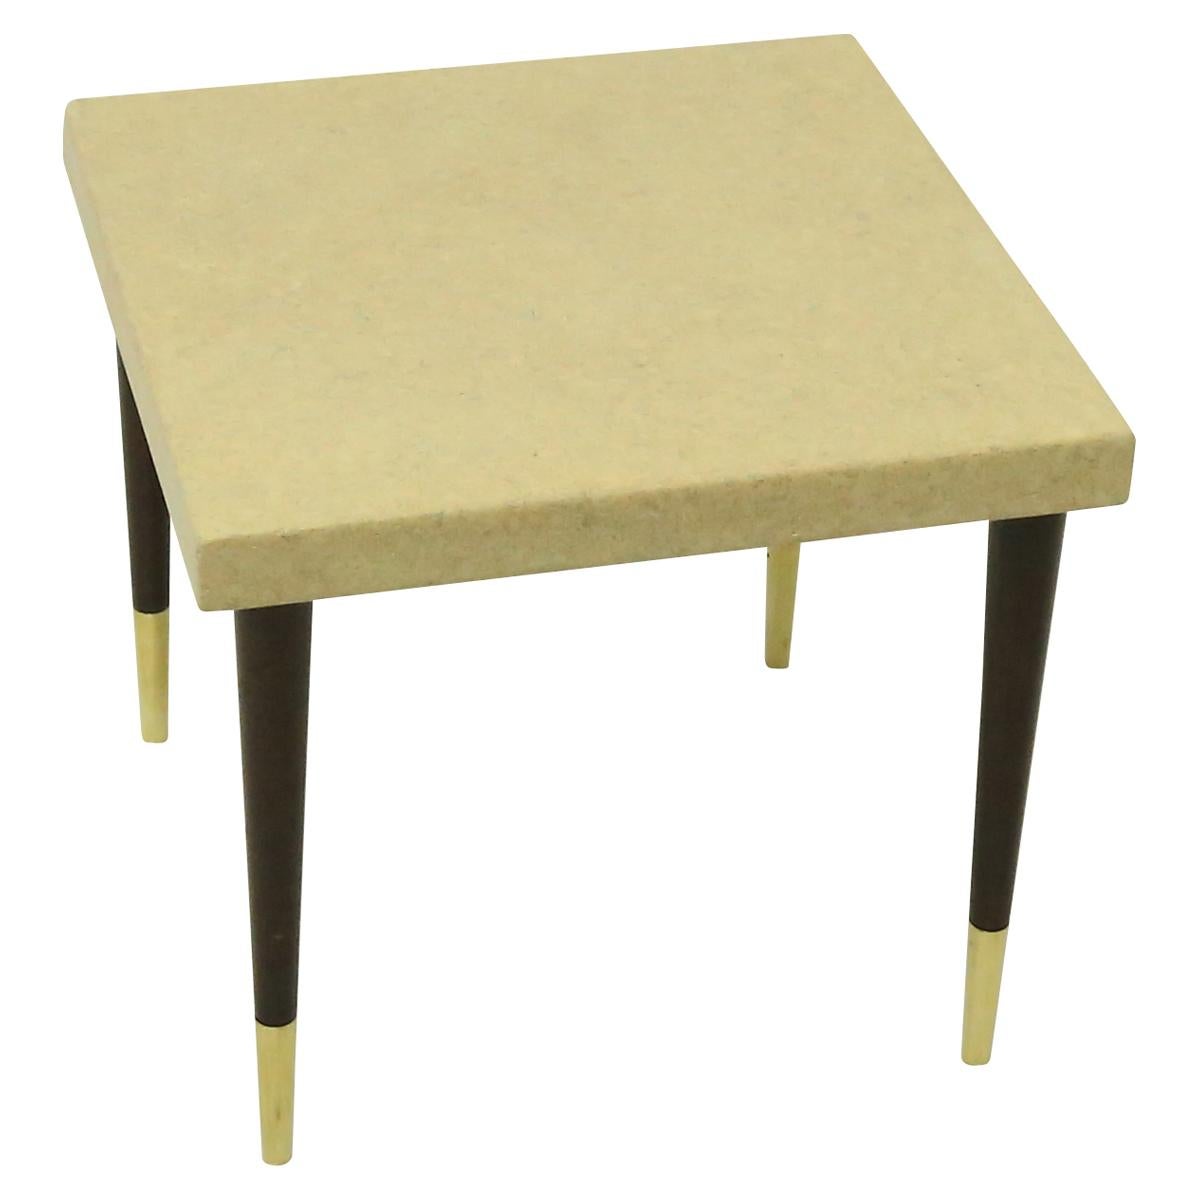 Pair of square Paul Frankl cork wrapped top side tables with mahogany legs and capped brass feet.
The tables were designed for Johnson Furniture Company. 

About Paul Frankl (Designer)
Born in Vienna, Paul Frankl came to the United States in 1914 as